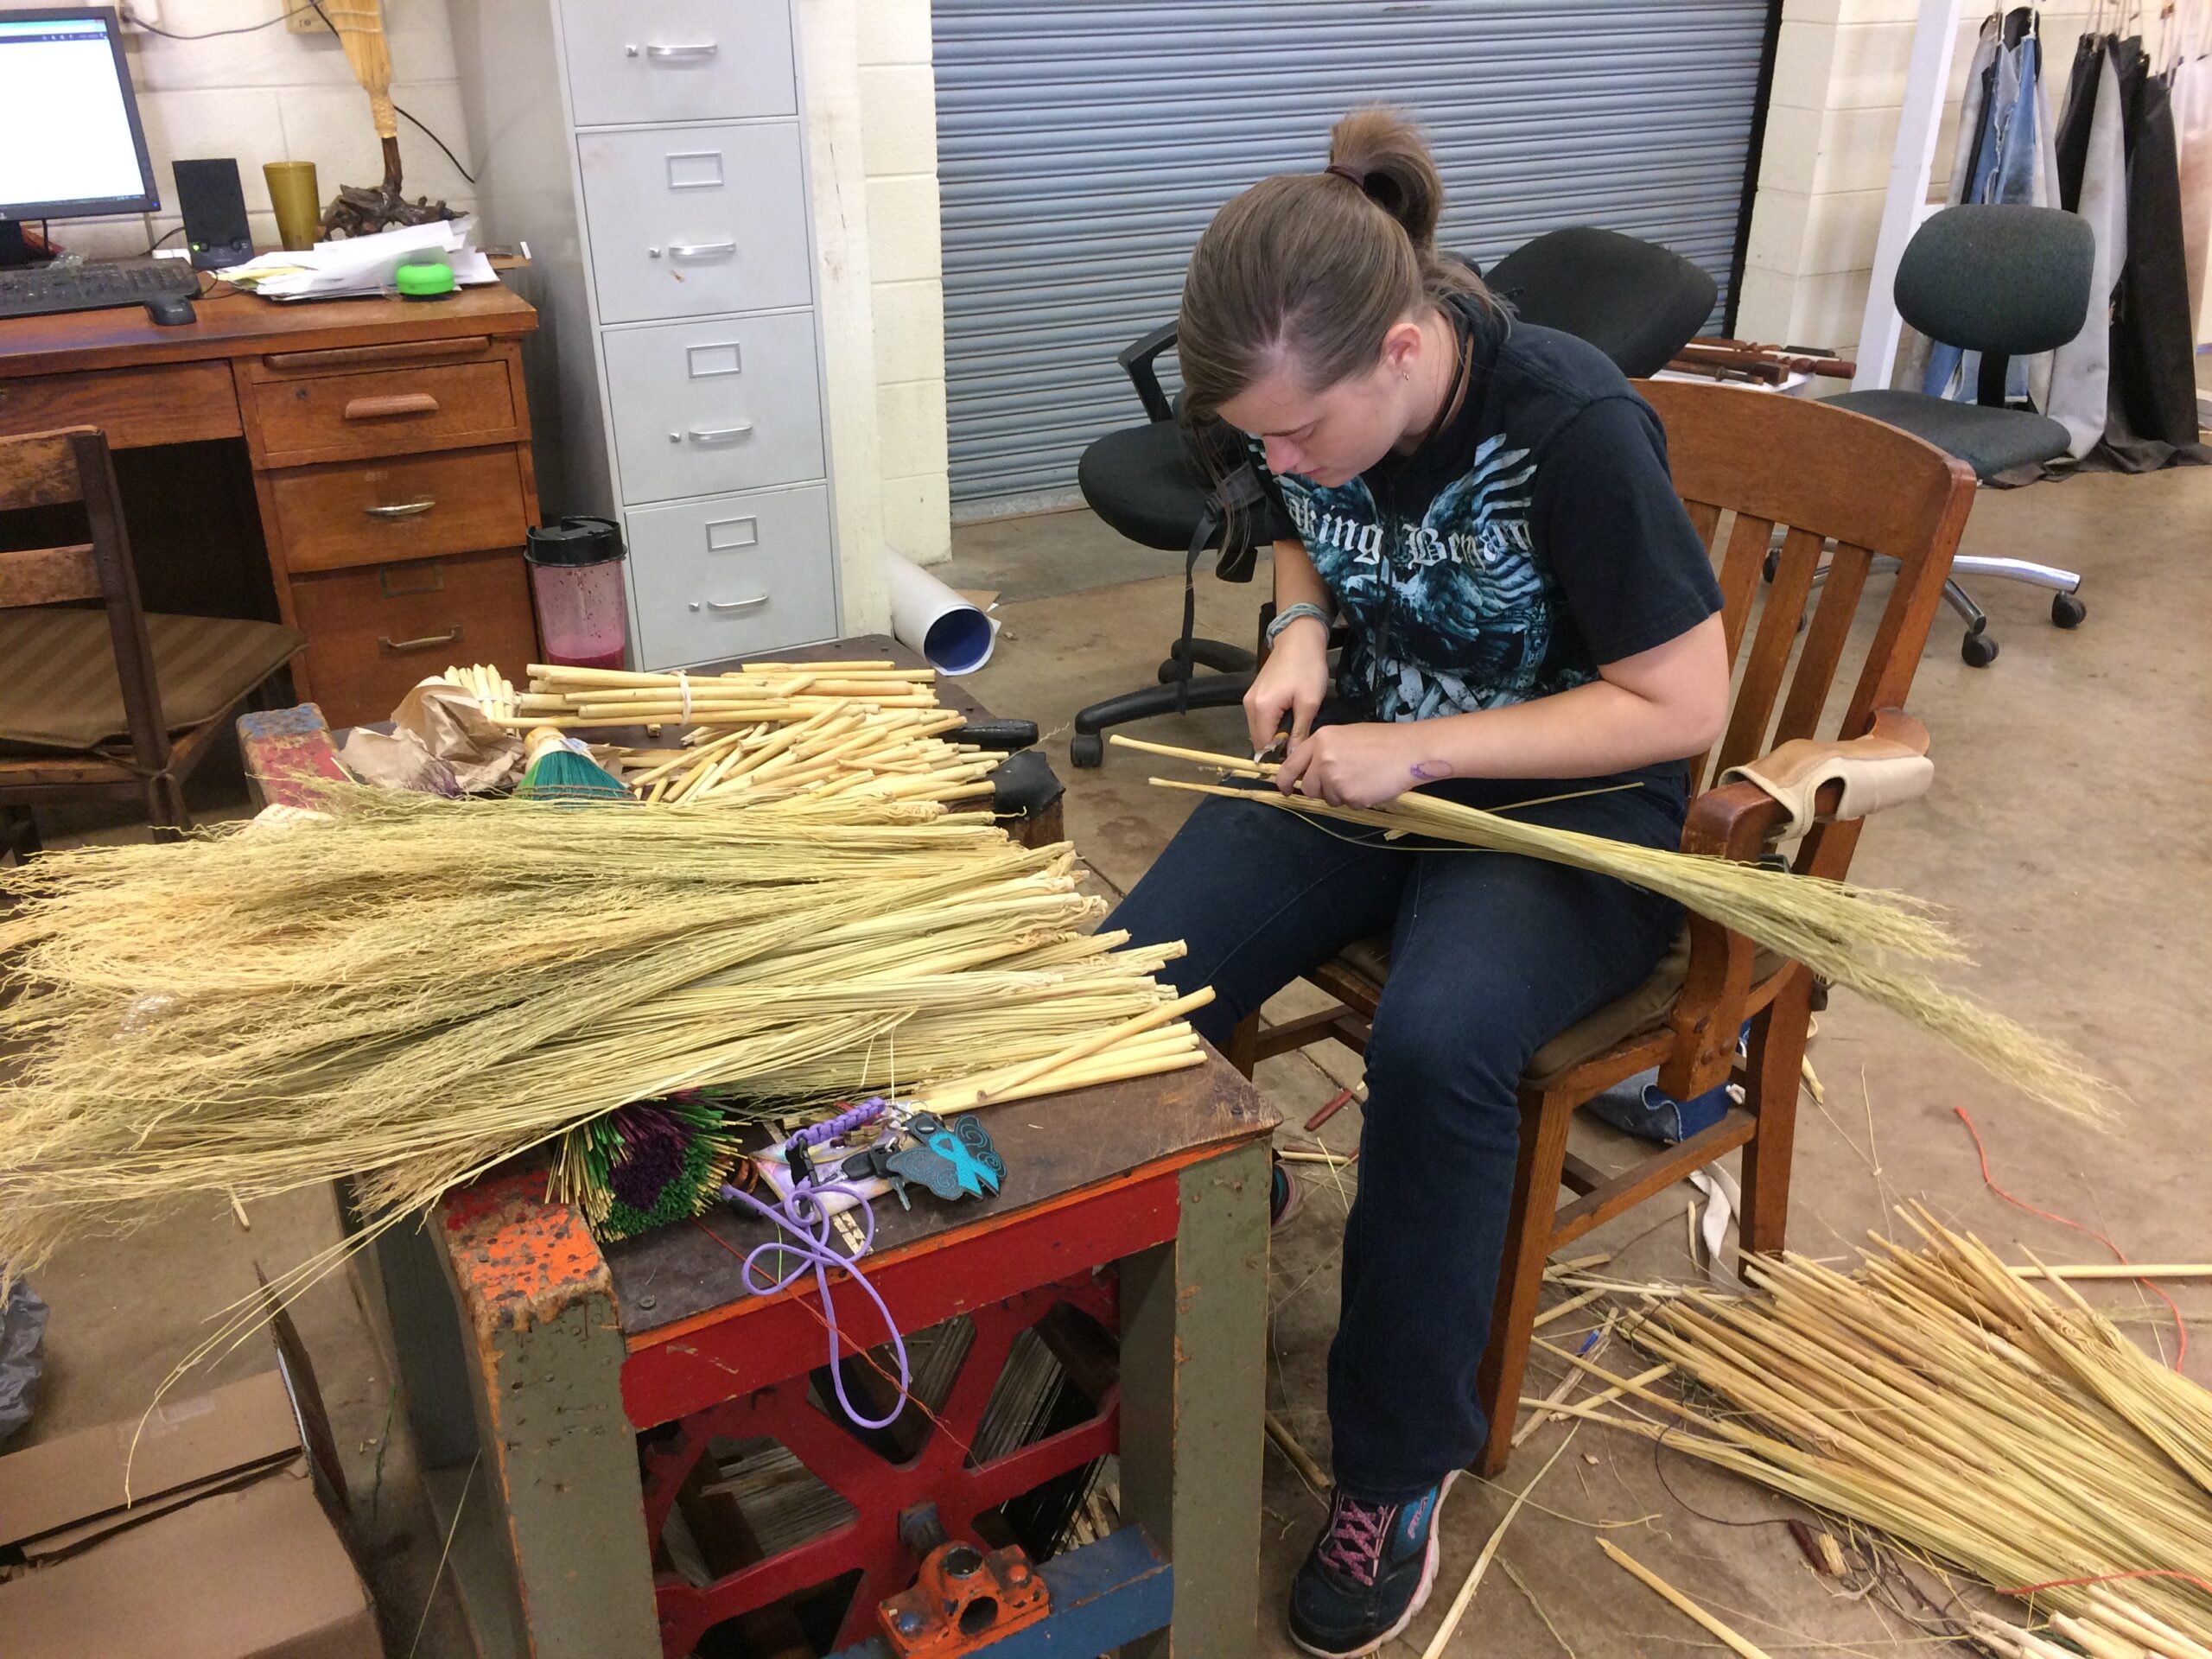 Berea requires students to work at least 10 hours per week on campus. Among the more unique programs is the school’s broom studio, which sells its products around campus and online.